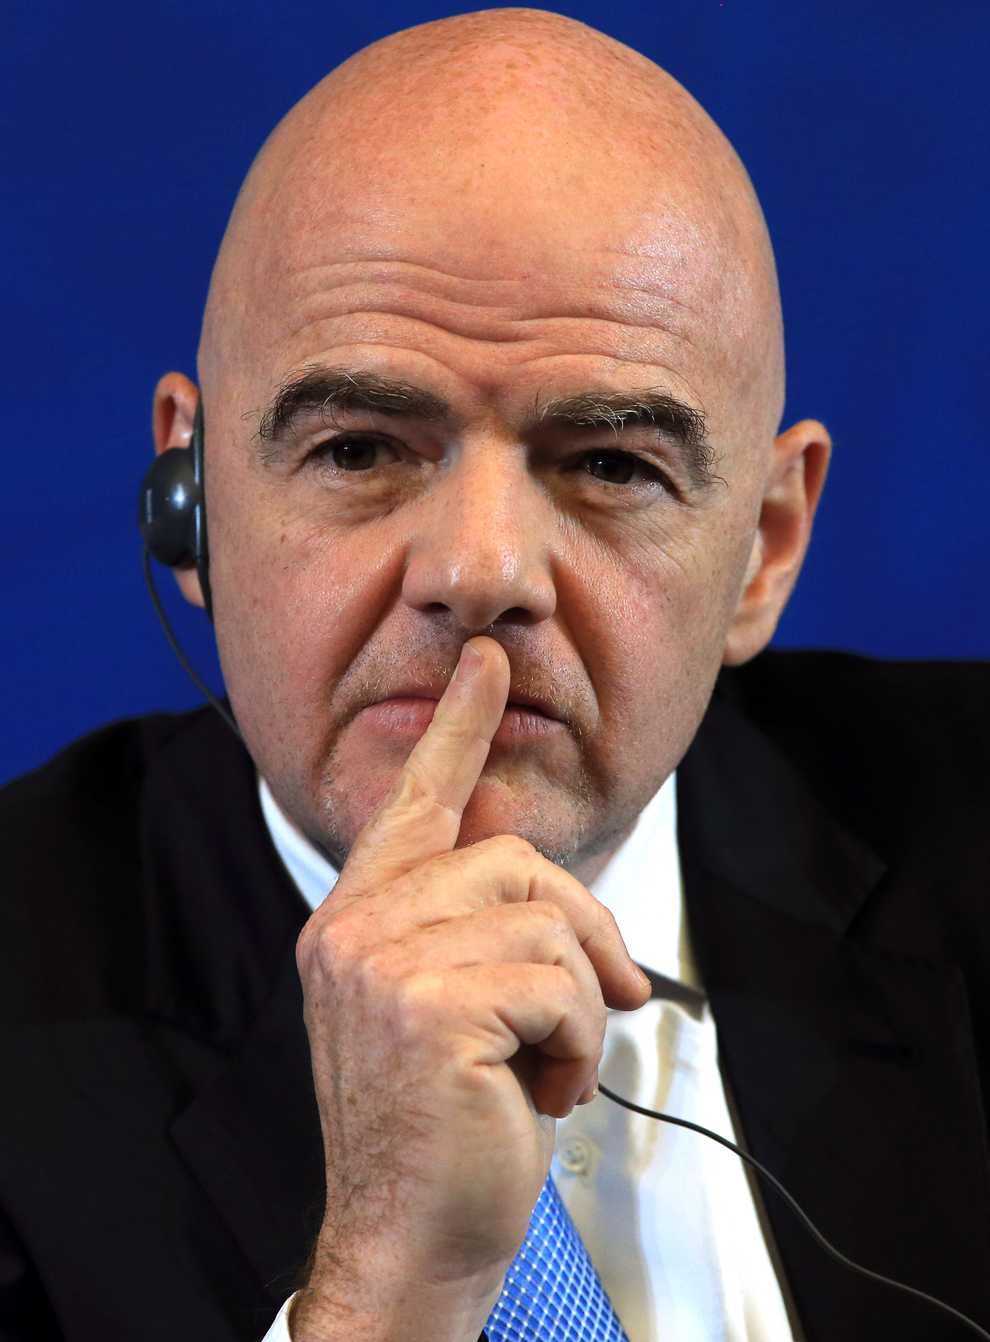 Gianni Infantino says the remission of over $200million stolen dollars to FIFA shows how far the governing body has come (Nick Potts/PA)